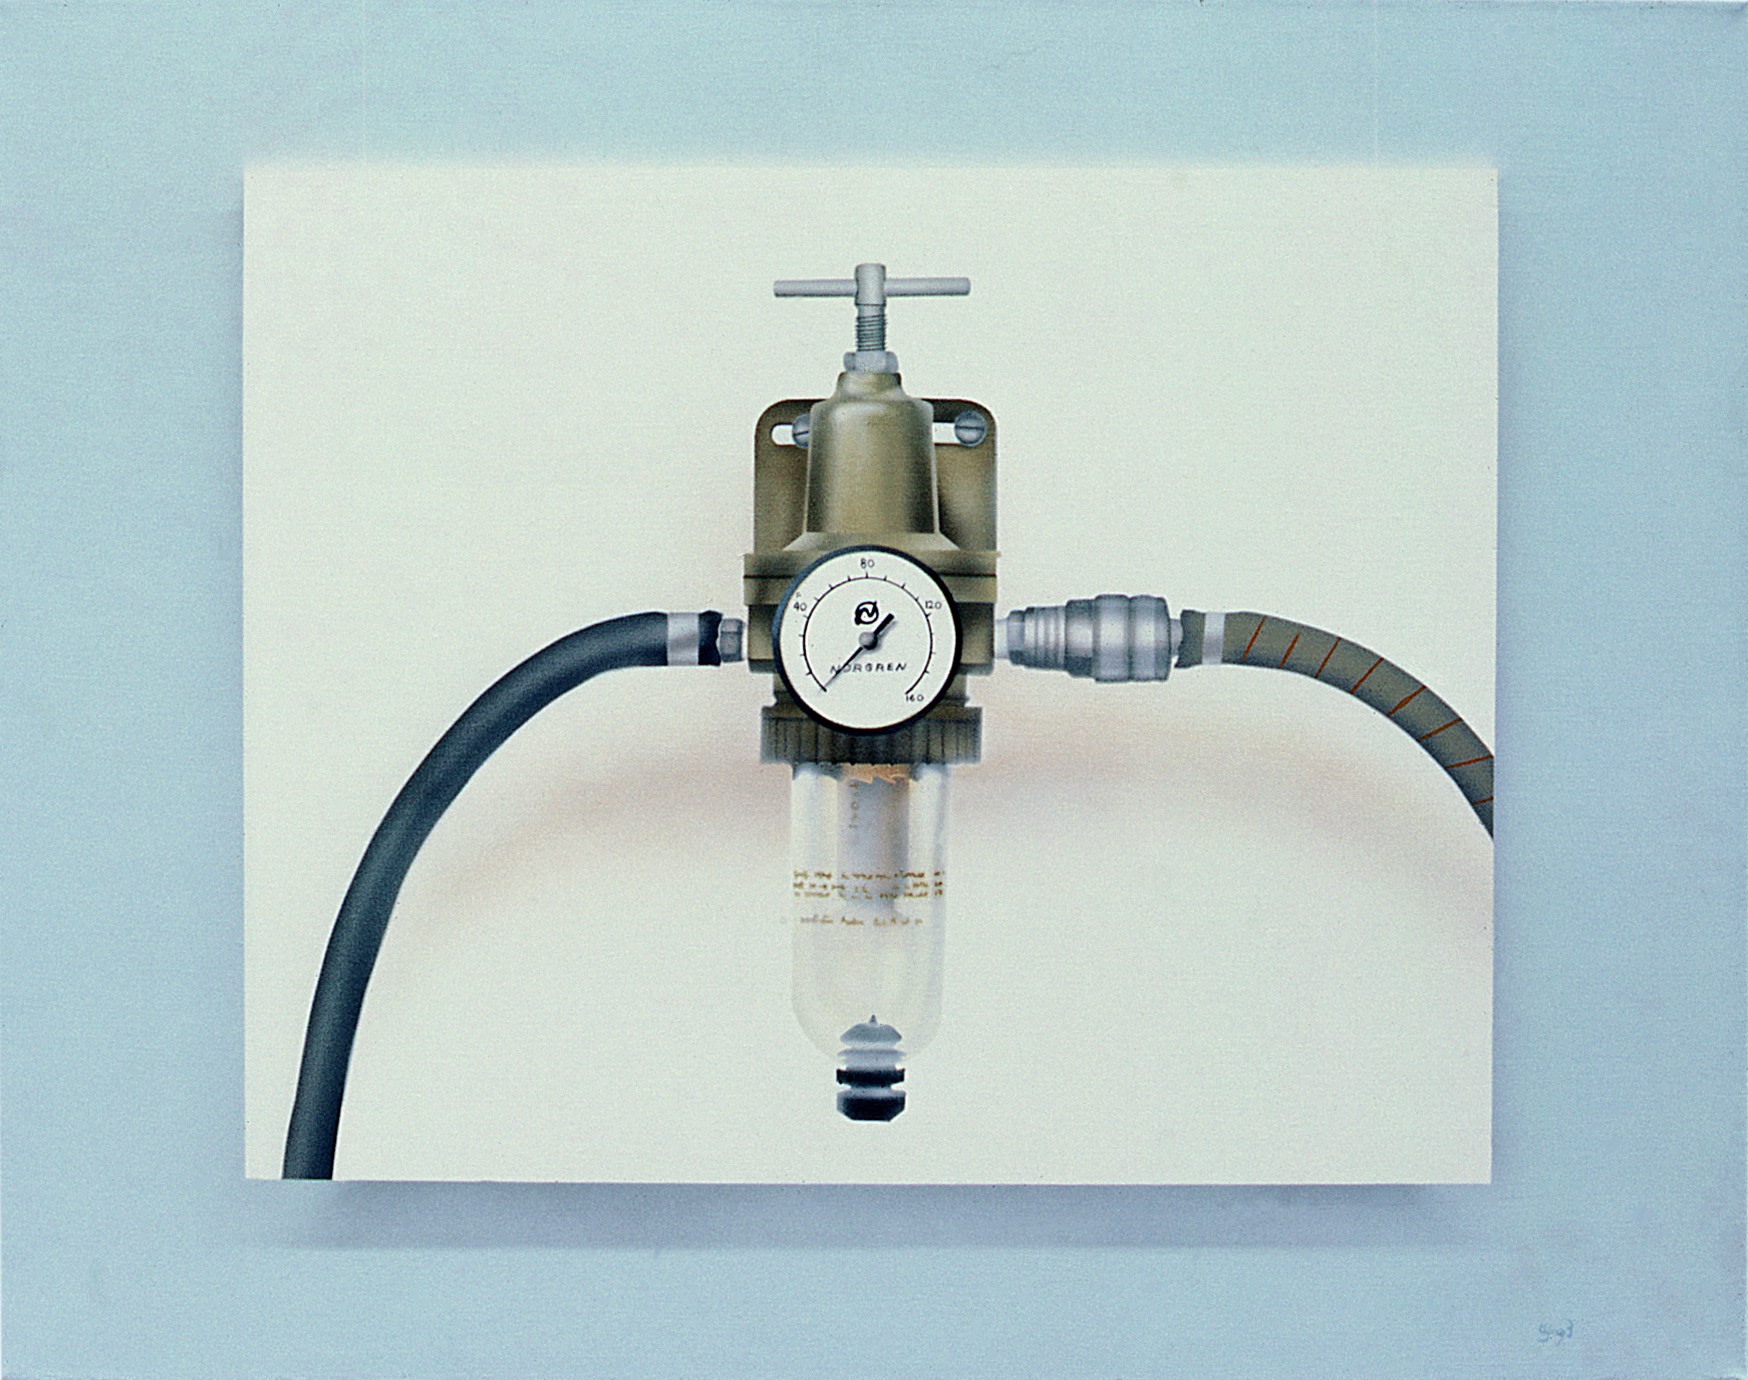 Pressure Gauge, 1972, Acrylic on canvas, privat collection New York